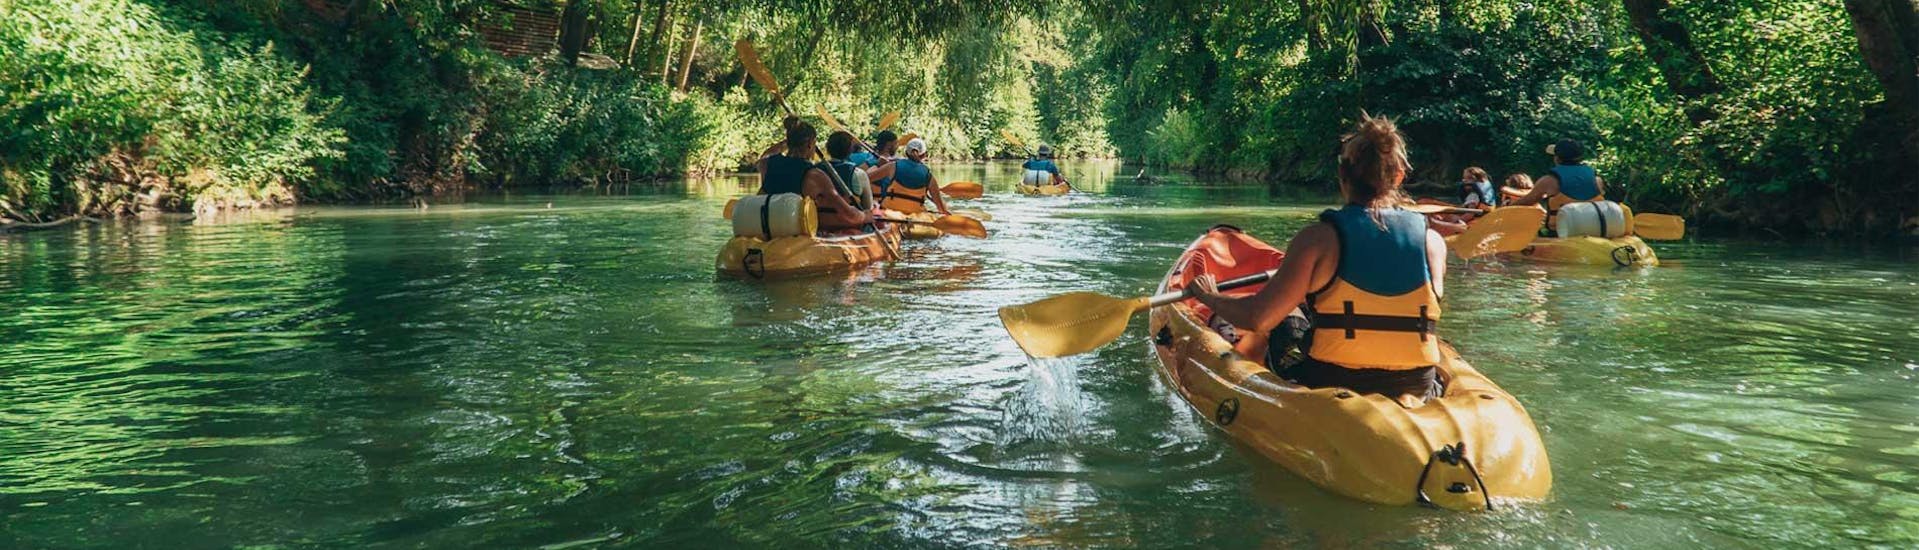 People are doing a kayak and canoe tour in Pommeuse with Canoe 77 Canoe 77 Seine-et-Marne